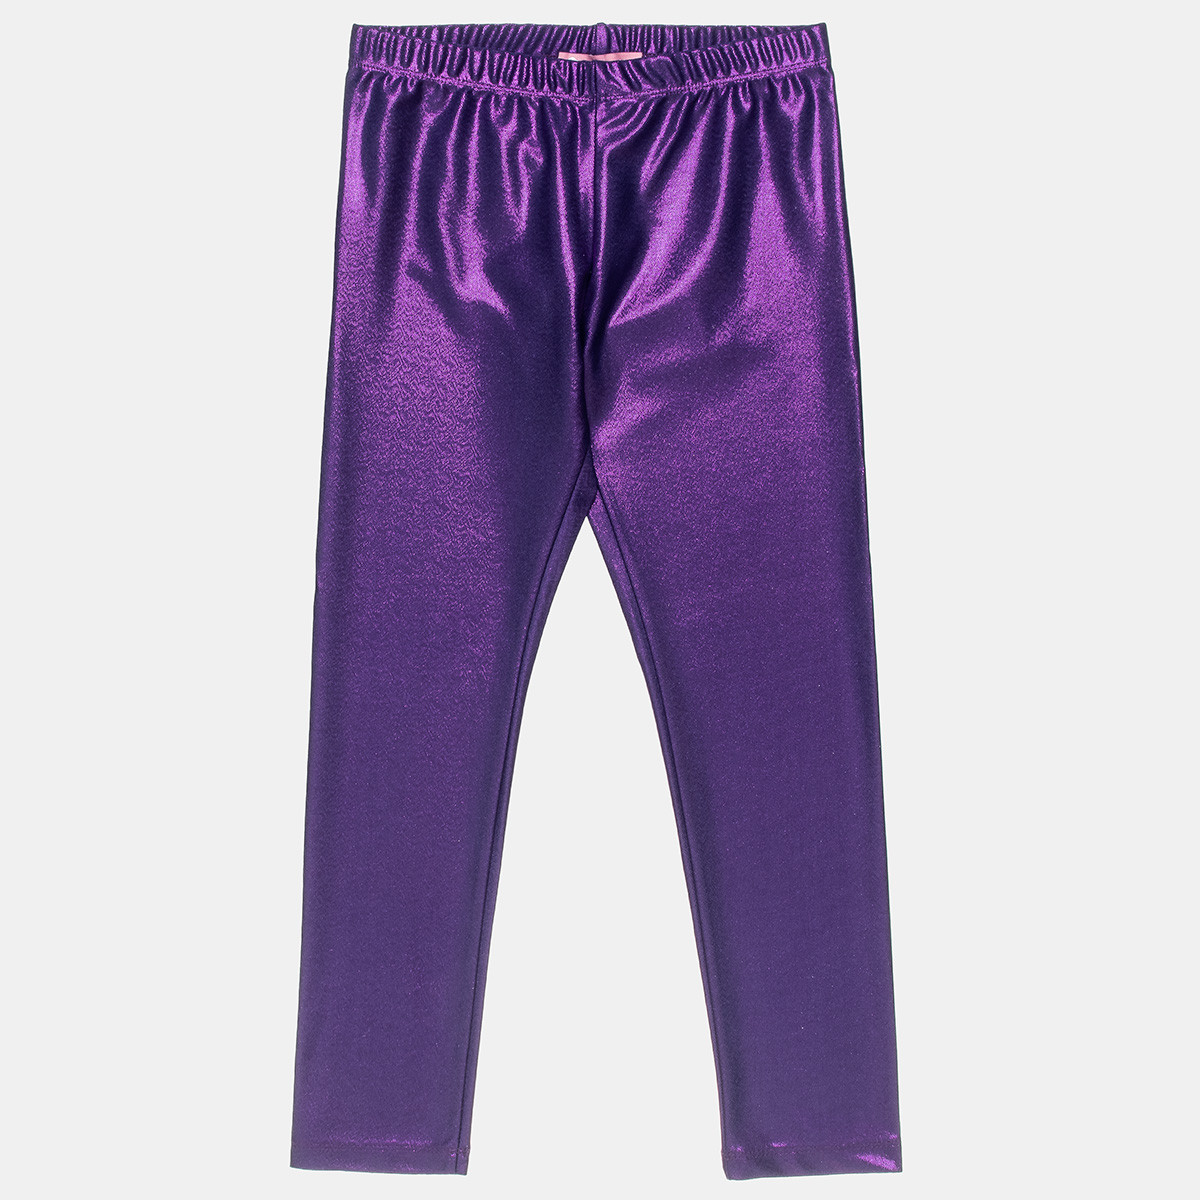 New Colour Just Landed 💜💜 Lilac 😍 The Original Turkish Metallic Legging  Extra High waist Super Stretchy Antibacterial Fabric S.M.L | Instagram